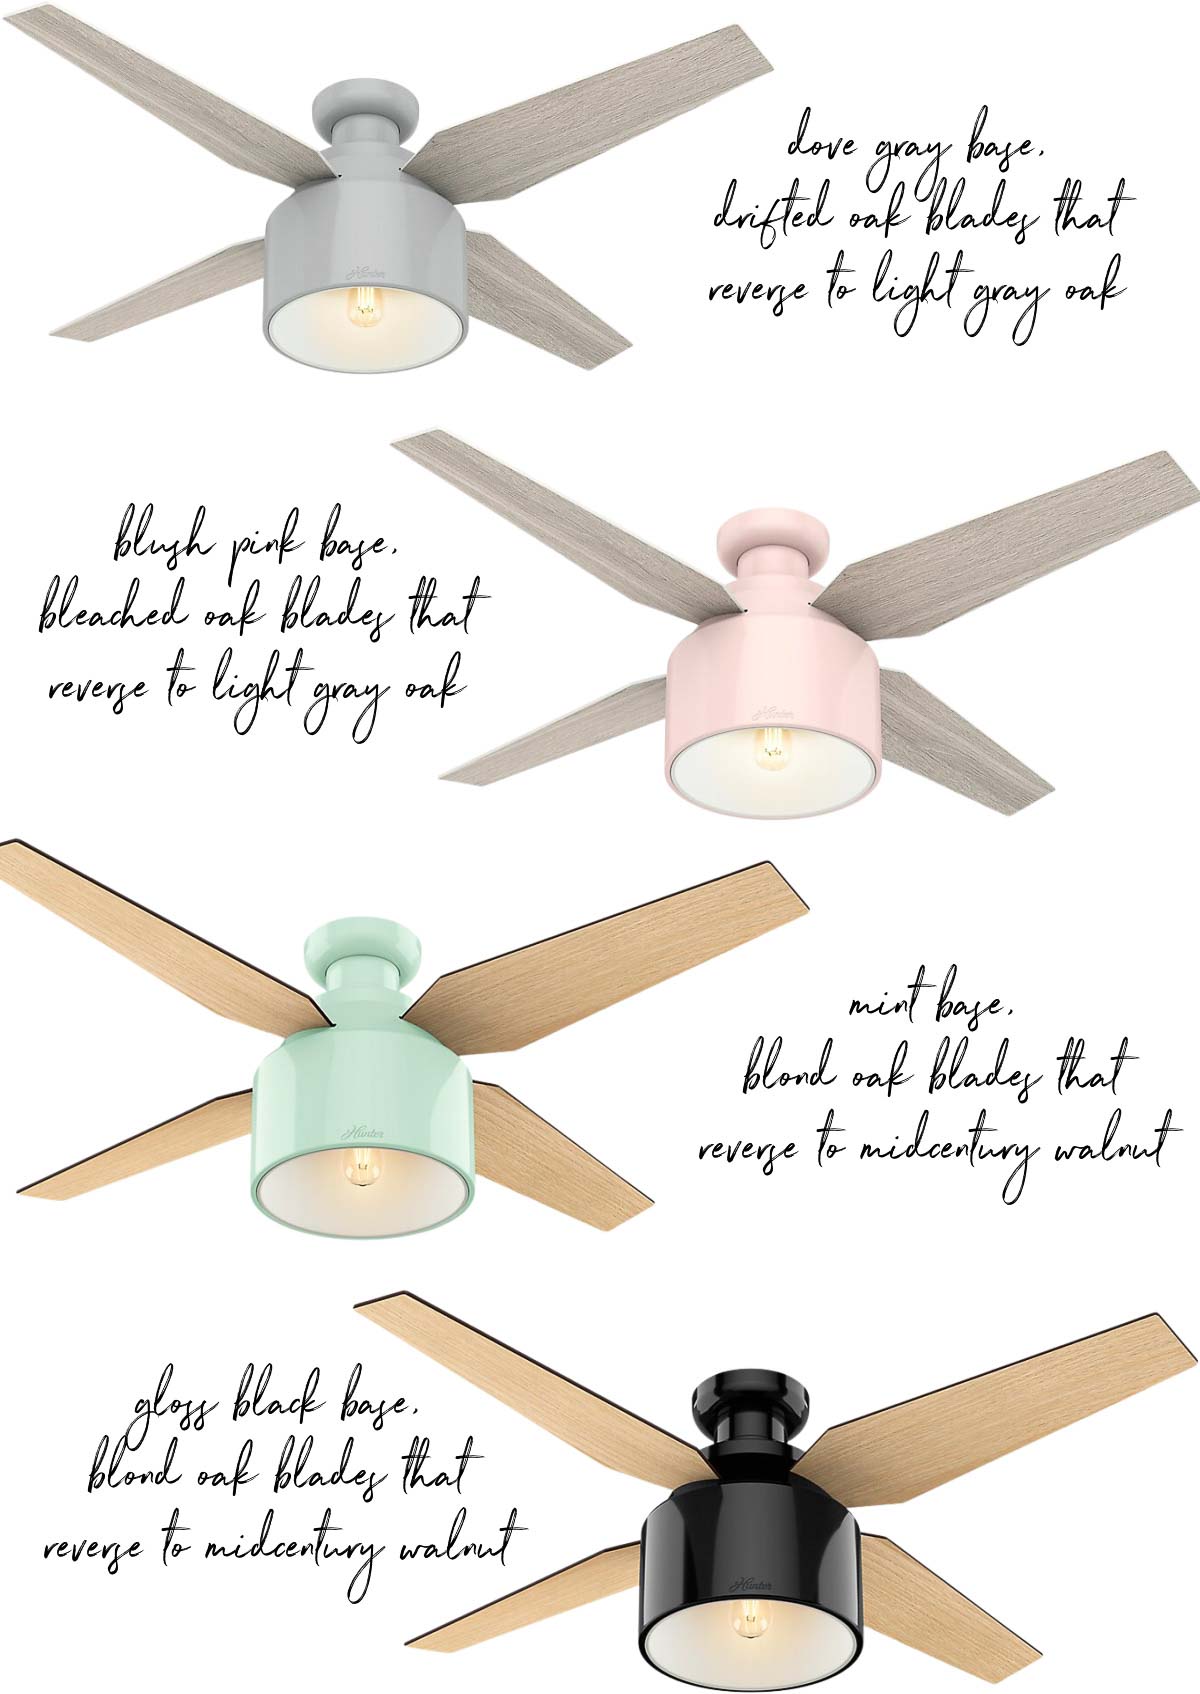 Darling bedroom ceiling fans including pastel colors that are great for kids rooms!